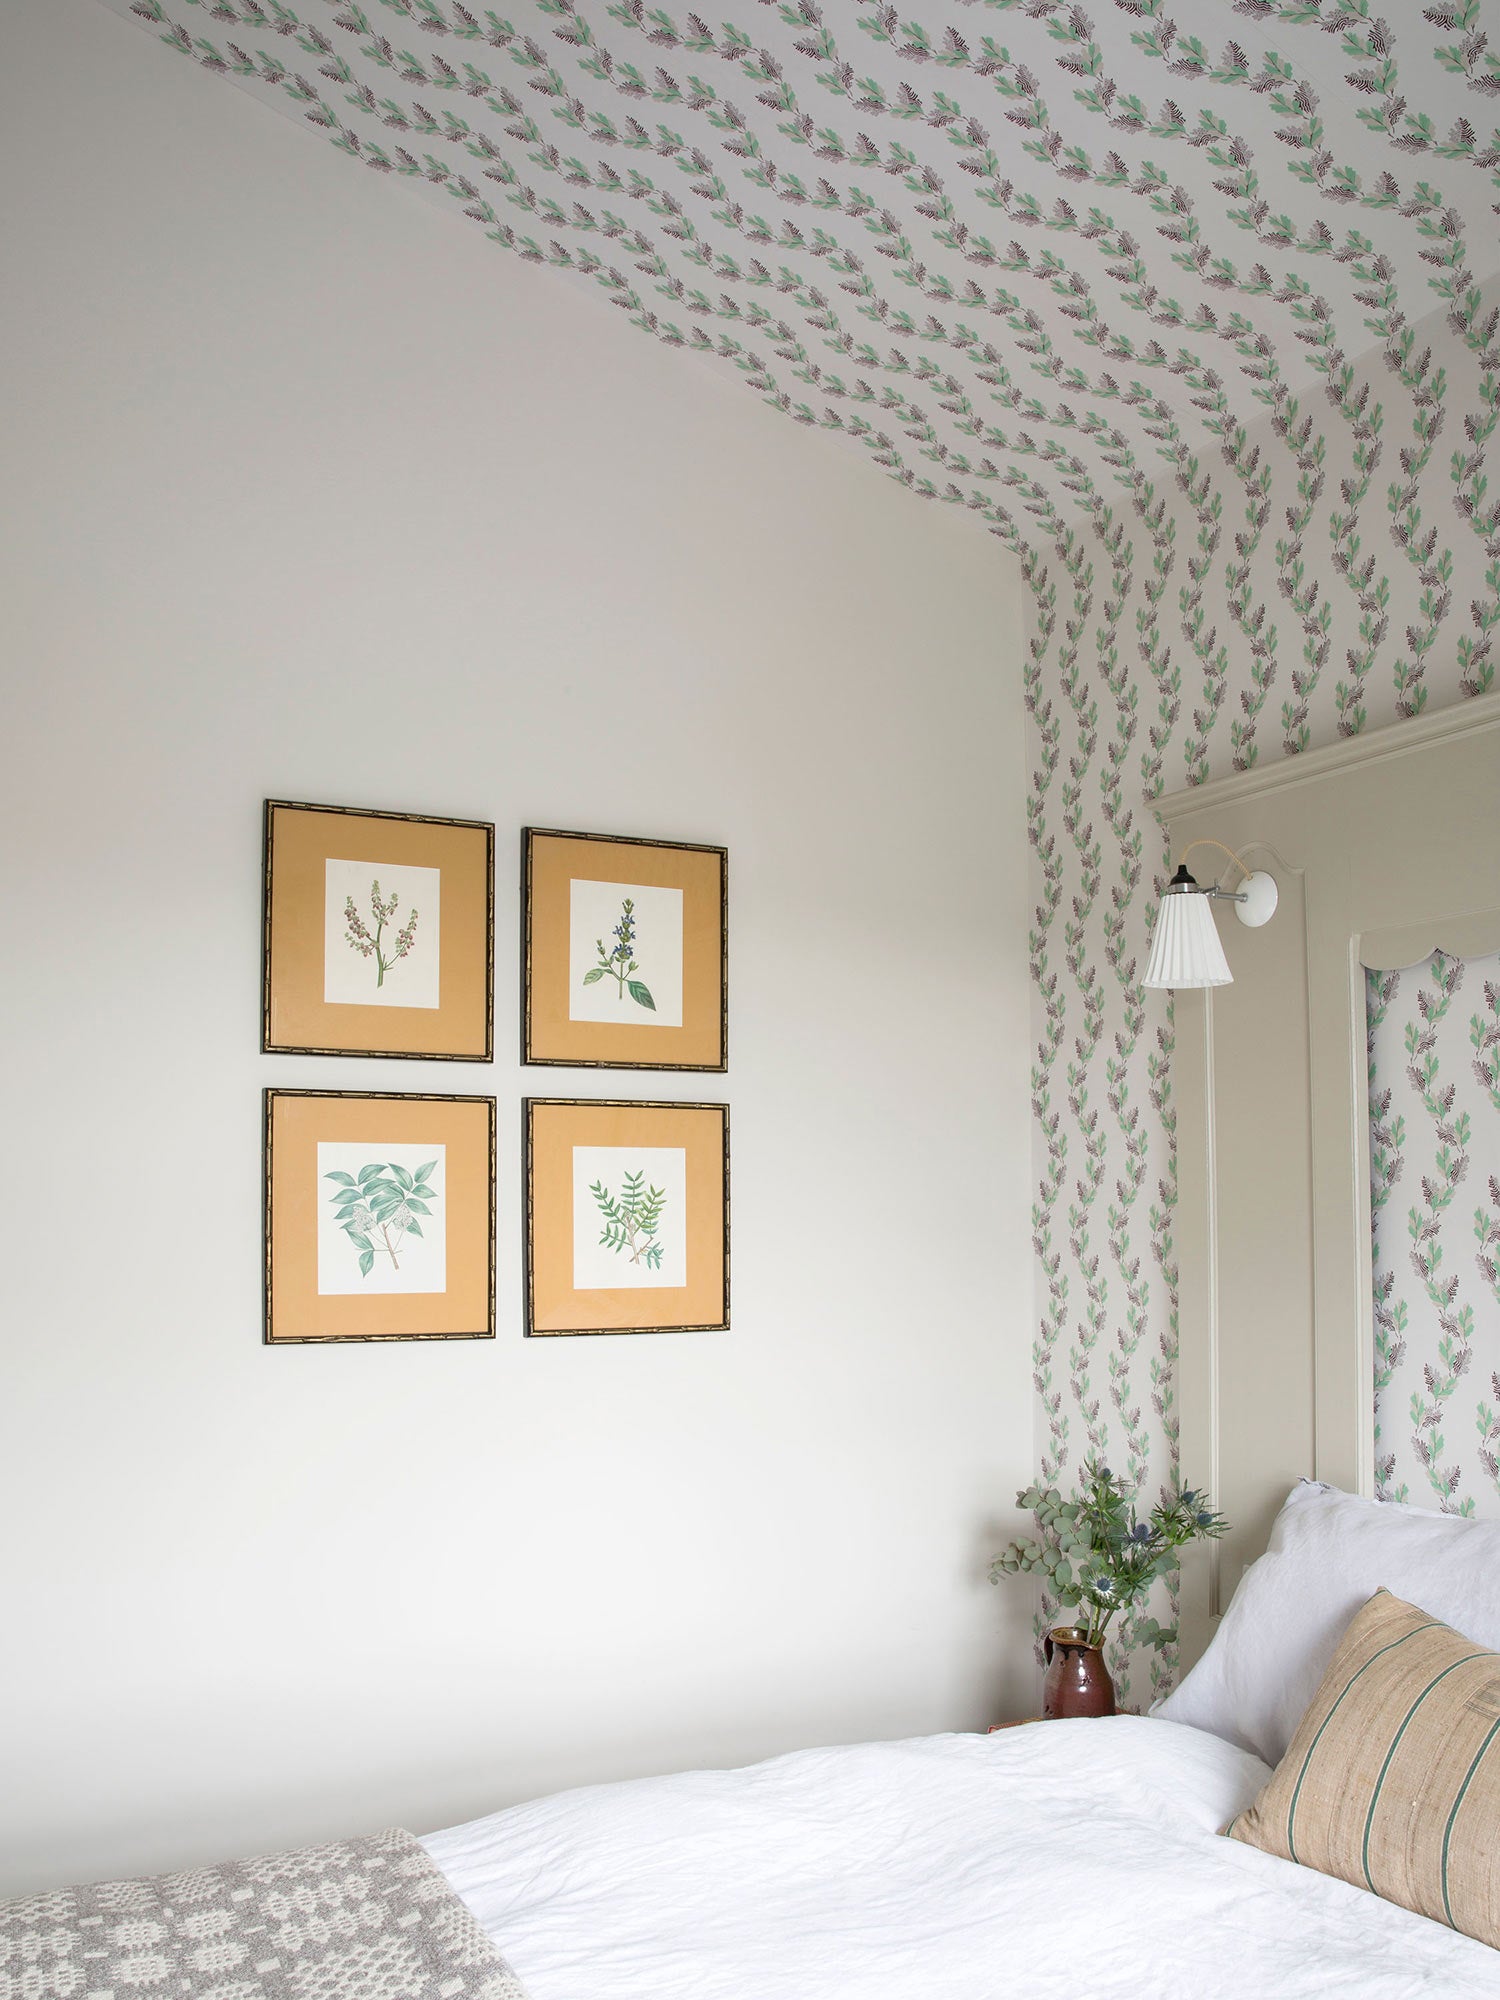 An archival design dating back to 1800, this wavy wallpaper displays falling oak leaves in green and brown, pictured as a wallpaper canopy over a bed